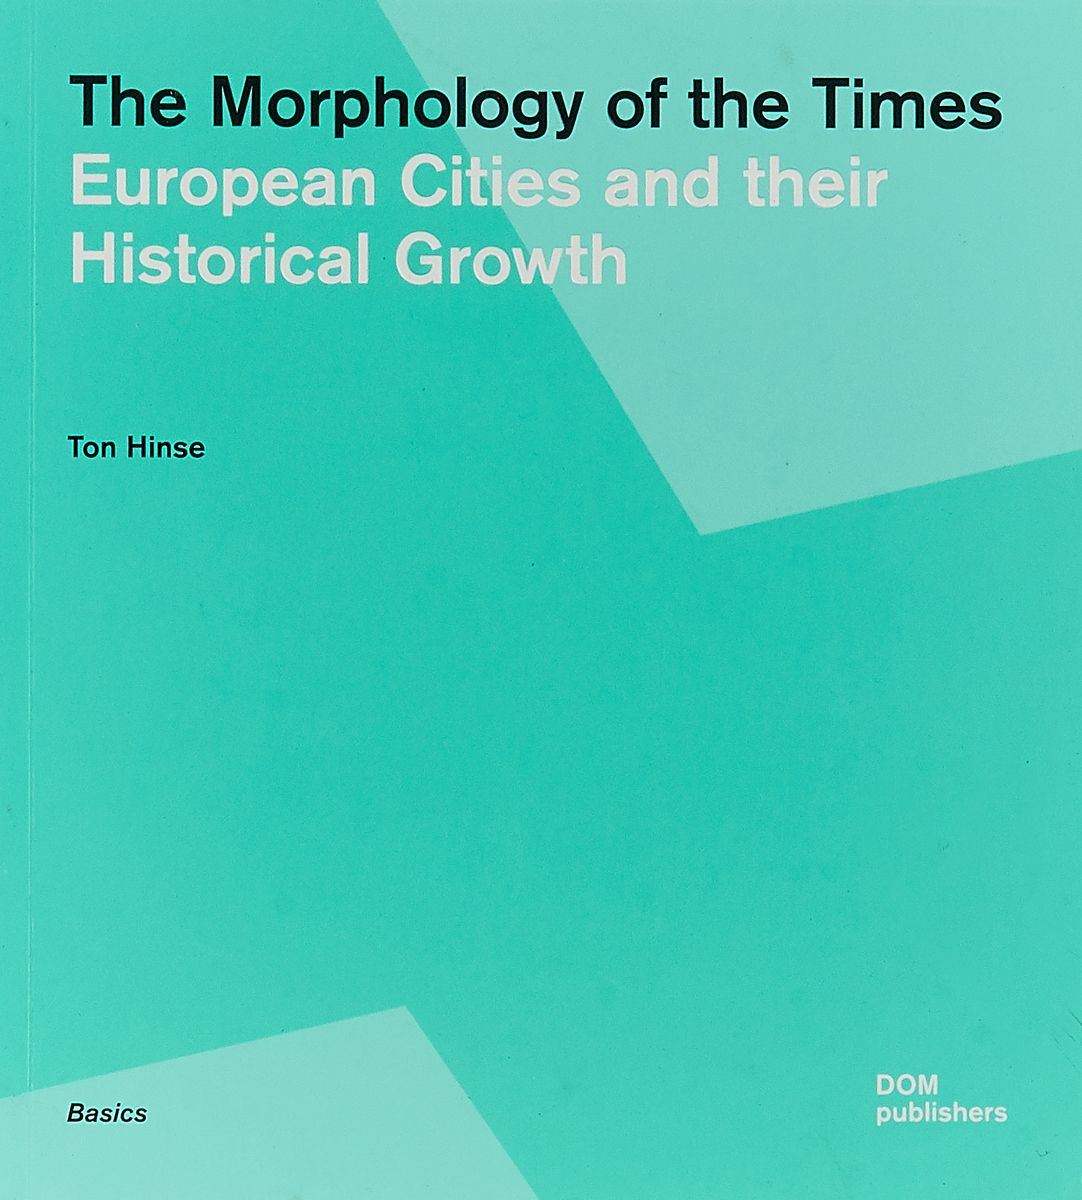 фото The Morphology of Times. European Cites and their Historical Growth Dom publishers